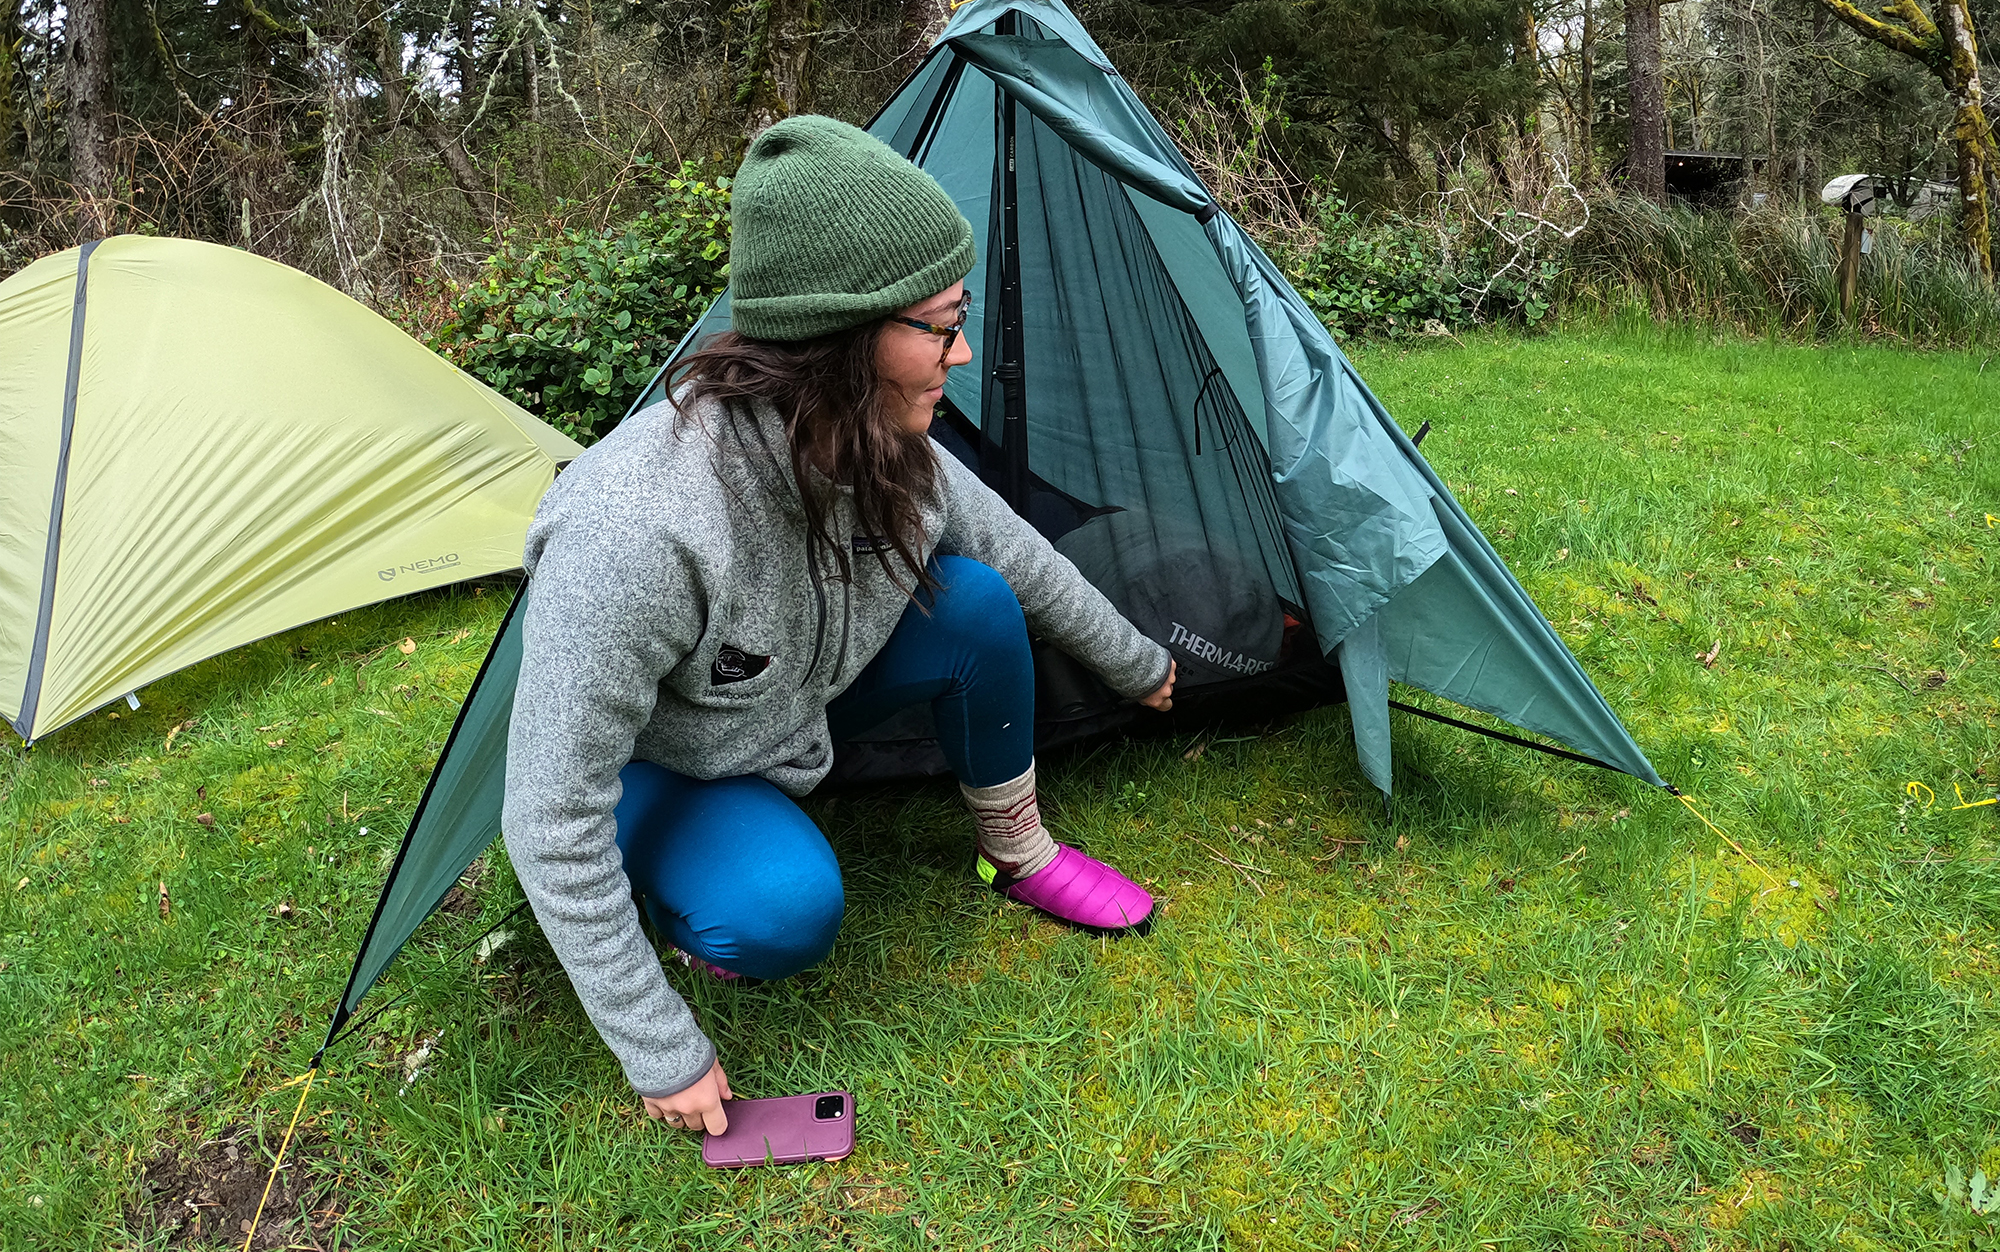 The Better Sweater is warm and comfortable in a variety of conditions, including camping along the Oregon coast in chilly spring conditions.